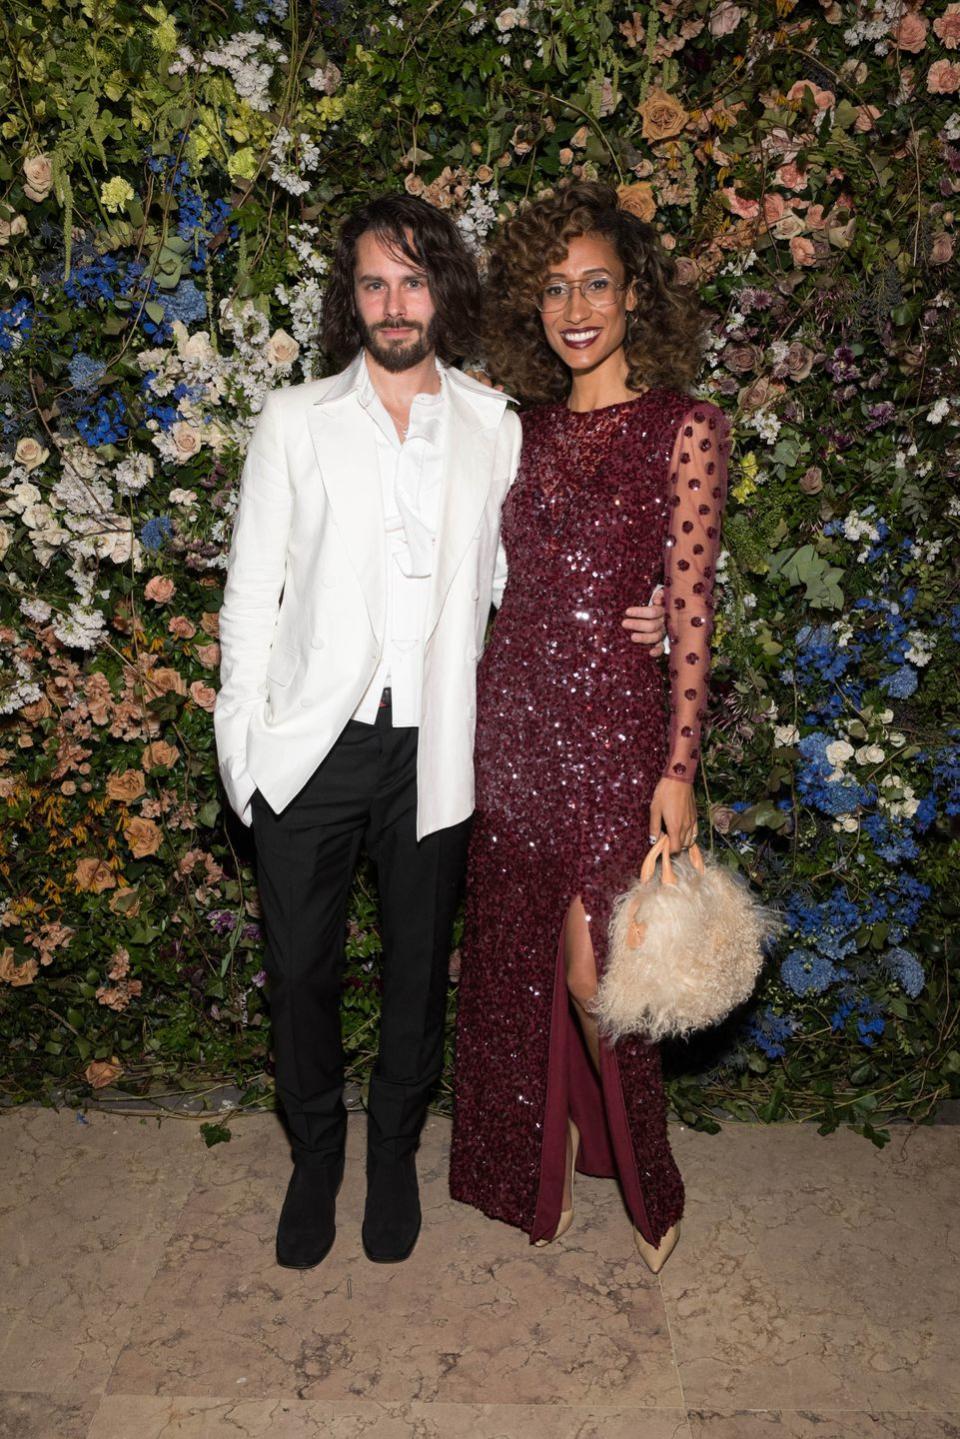 Niall Sloan and Elaine Welteroth